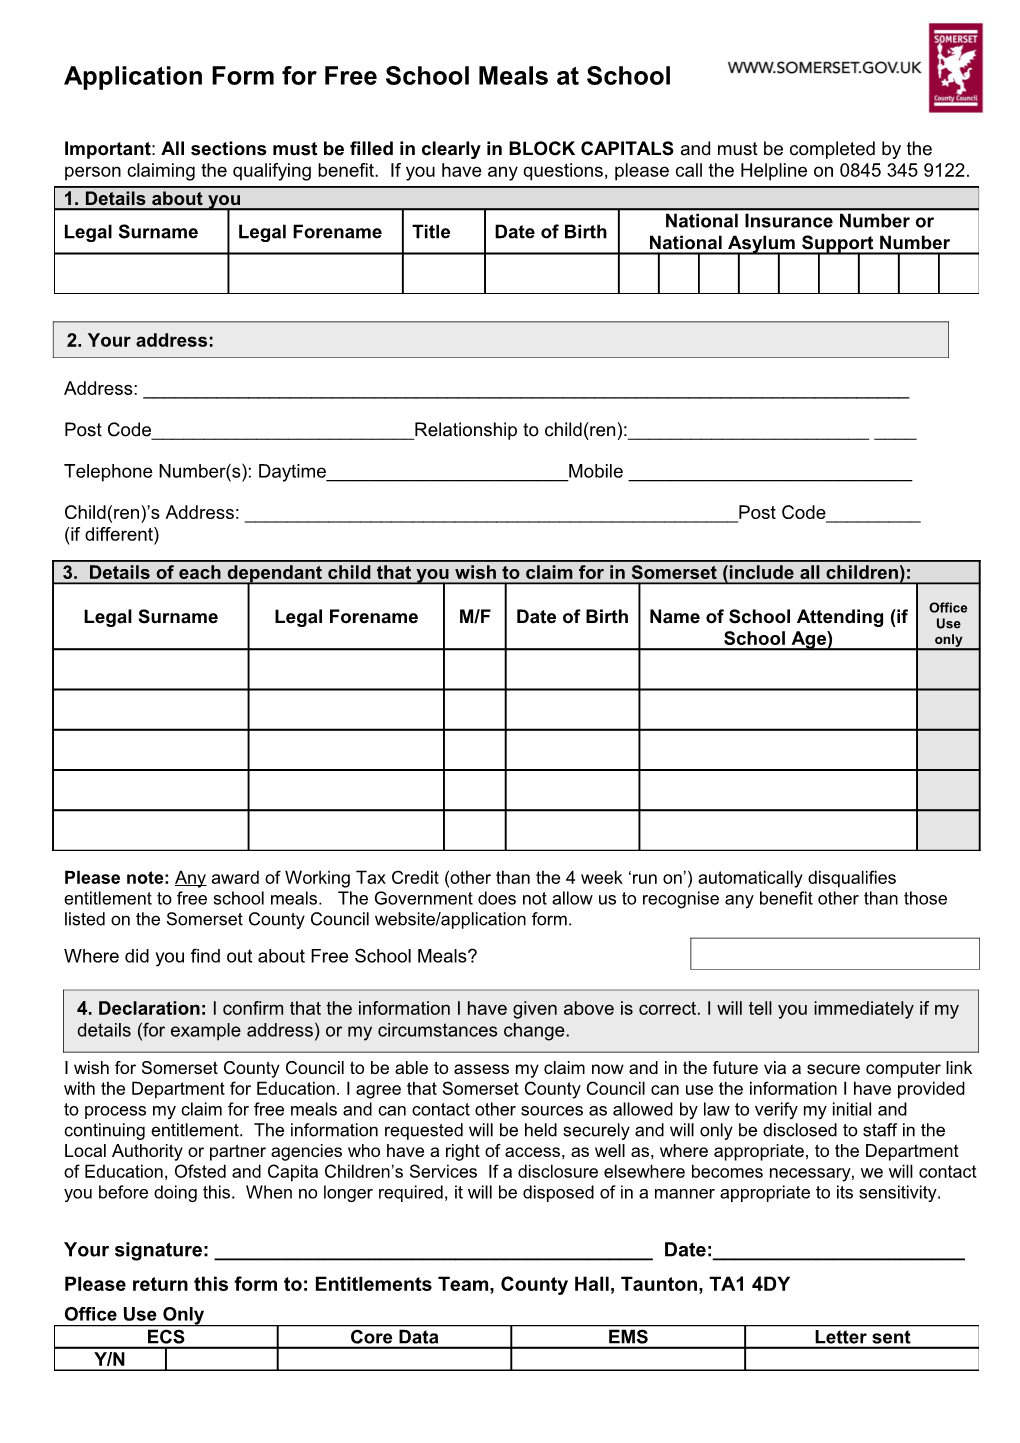 Application Form for Free School Meals